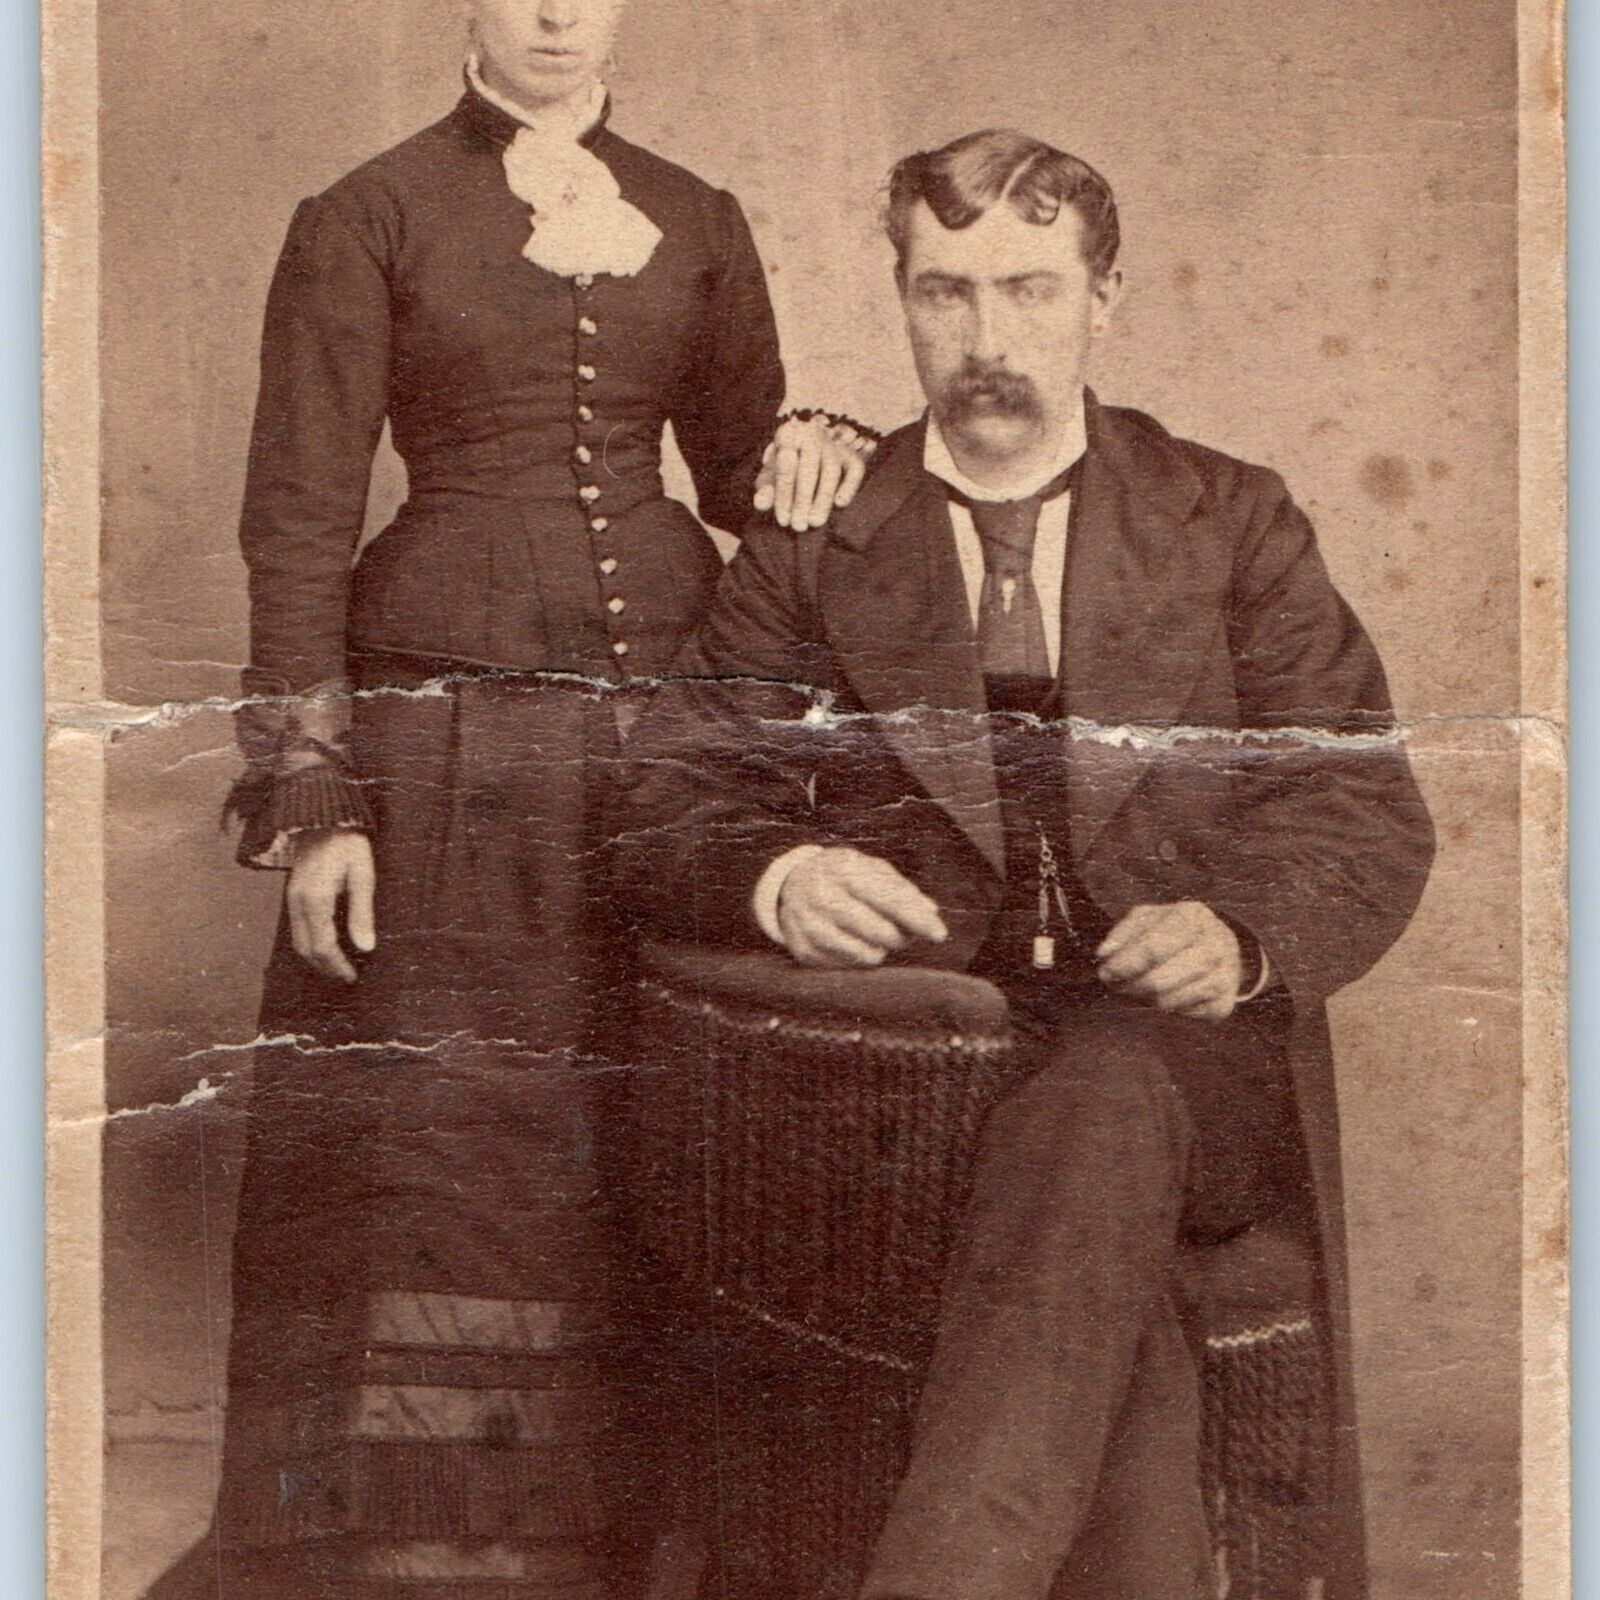 ID'd c1870s Lafargeville, NY Married Couple CdV Photo Card Geo Lamson, Spies H12